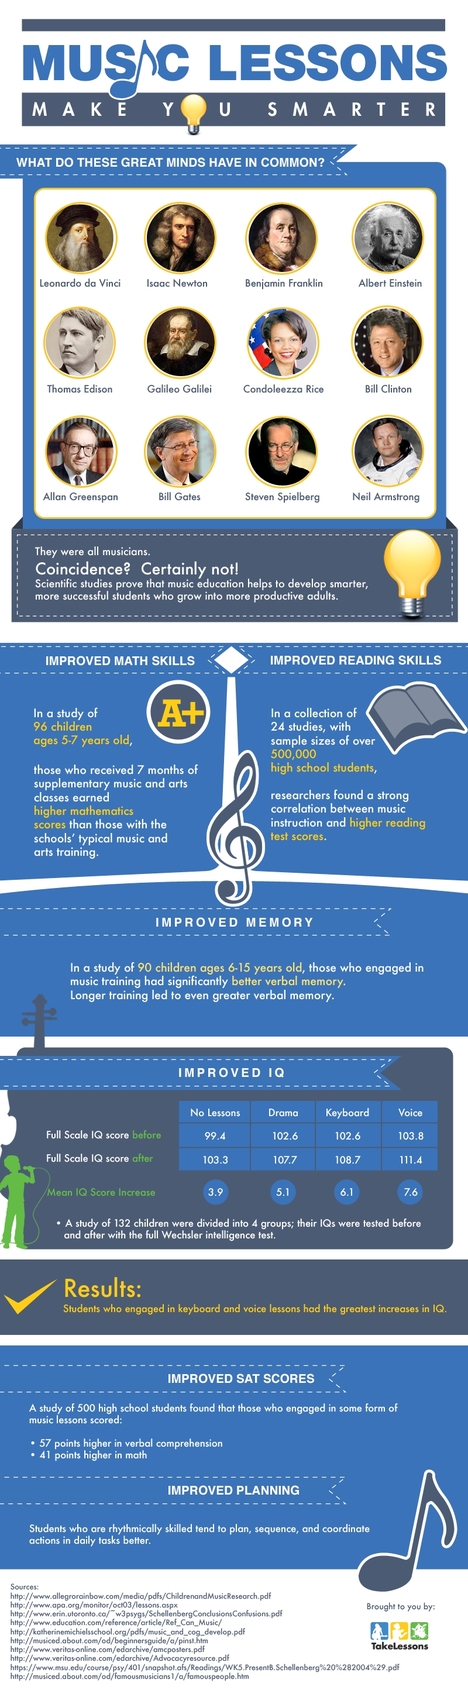 Music Lessons Make You Smarter (Infographic)